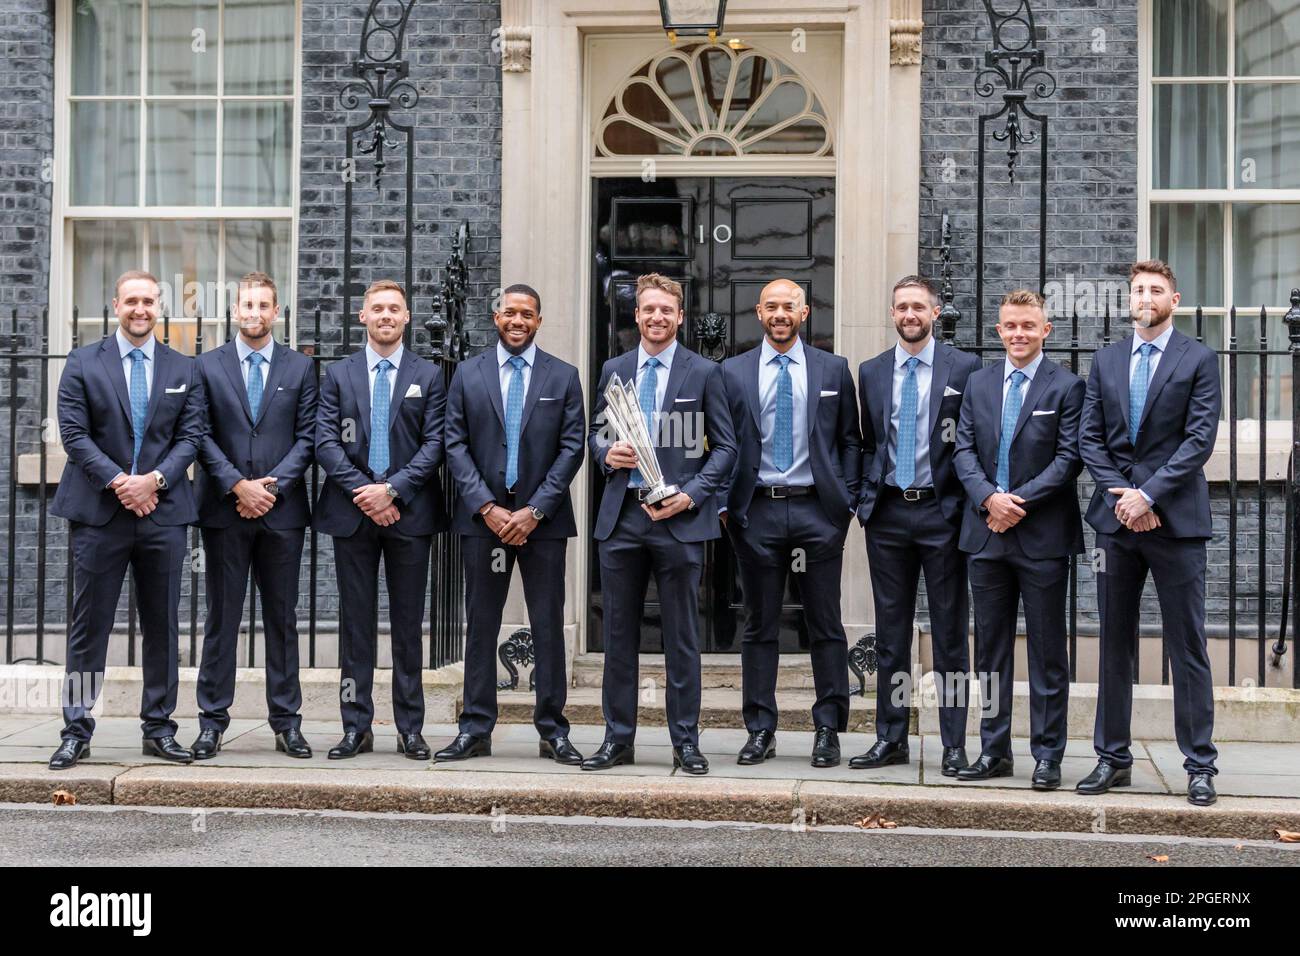 Downing Street, London, UK. 22nd March 2023. Jos Buttler and the England cricket team pose for photos following a reception in 10 Downing Street to celebrate winning the T20 World cup. They were accompanied by young players and other representatives of England Cricket. Photo by Amanda Rose/Alamy Live News Stock Photo